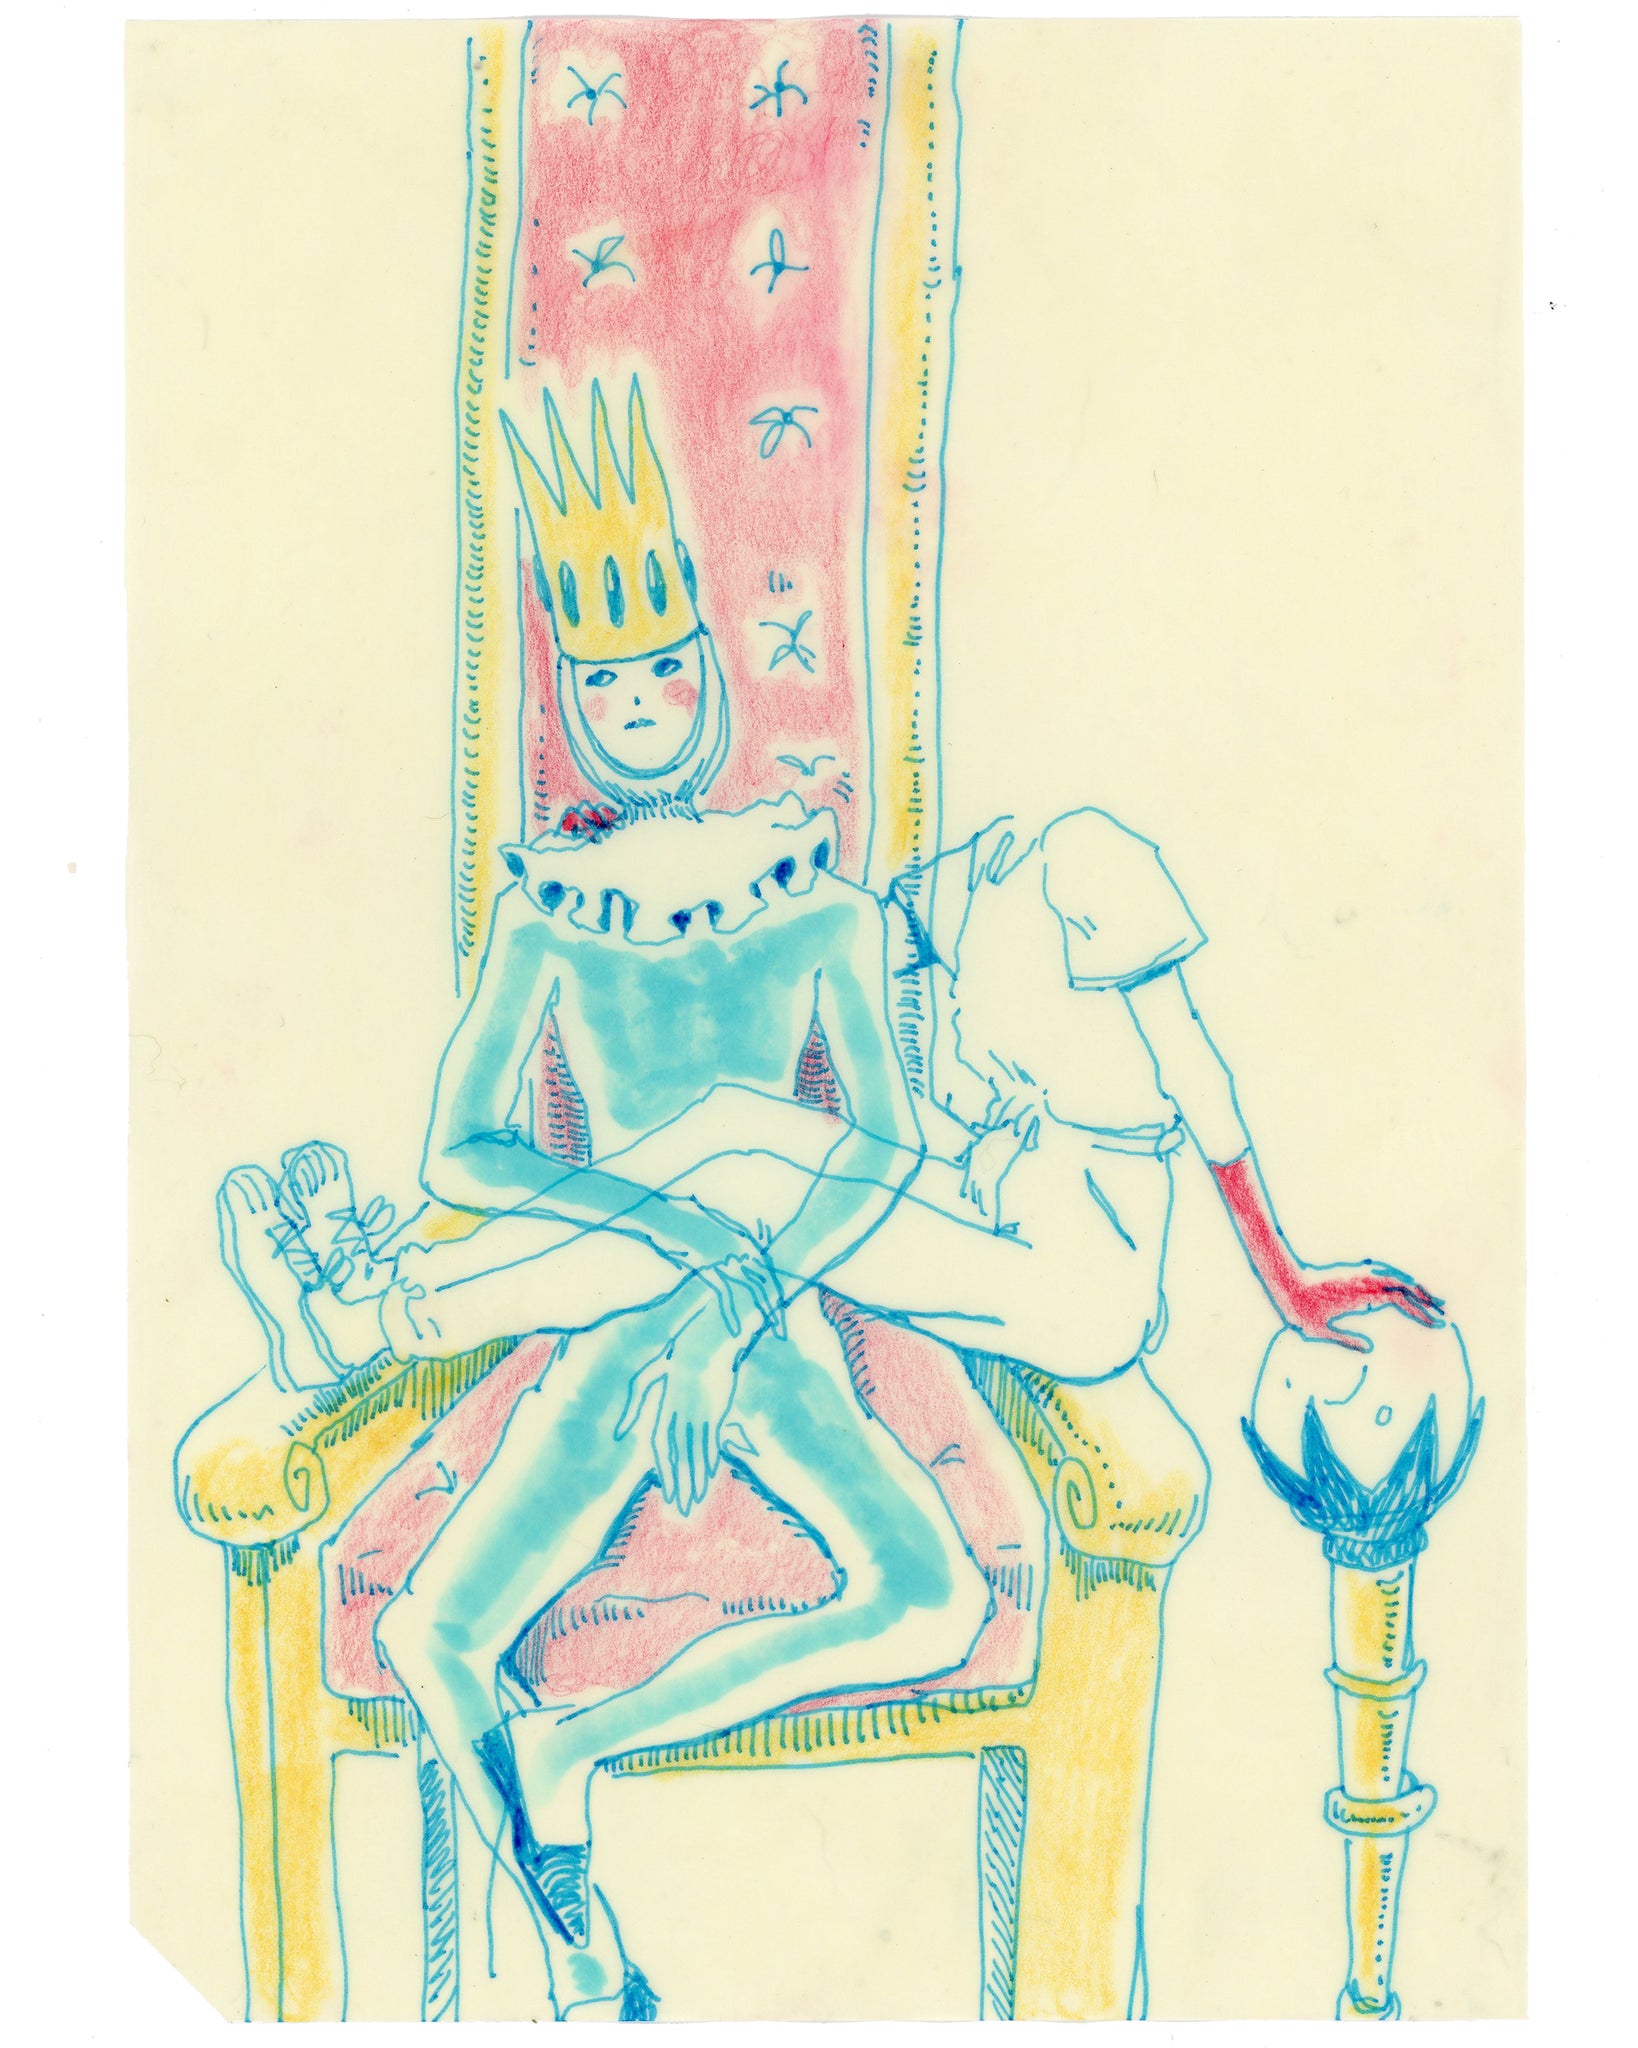 Drawing #47: "Kingly Muse and the Court Fool" [Beeswaxed Midori A5 paper]